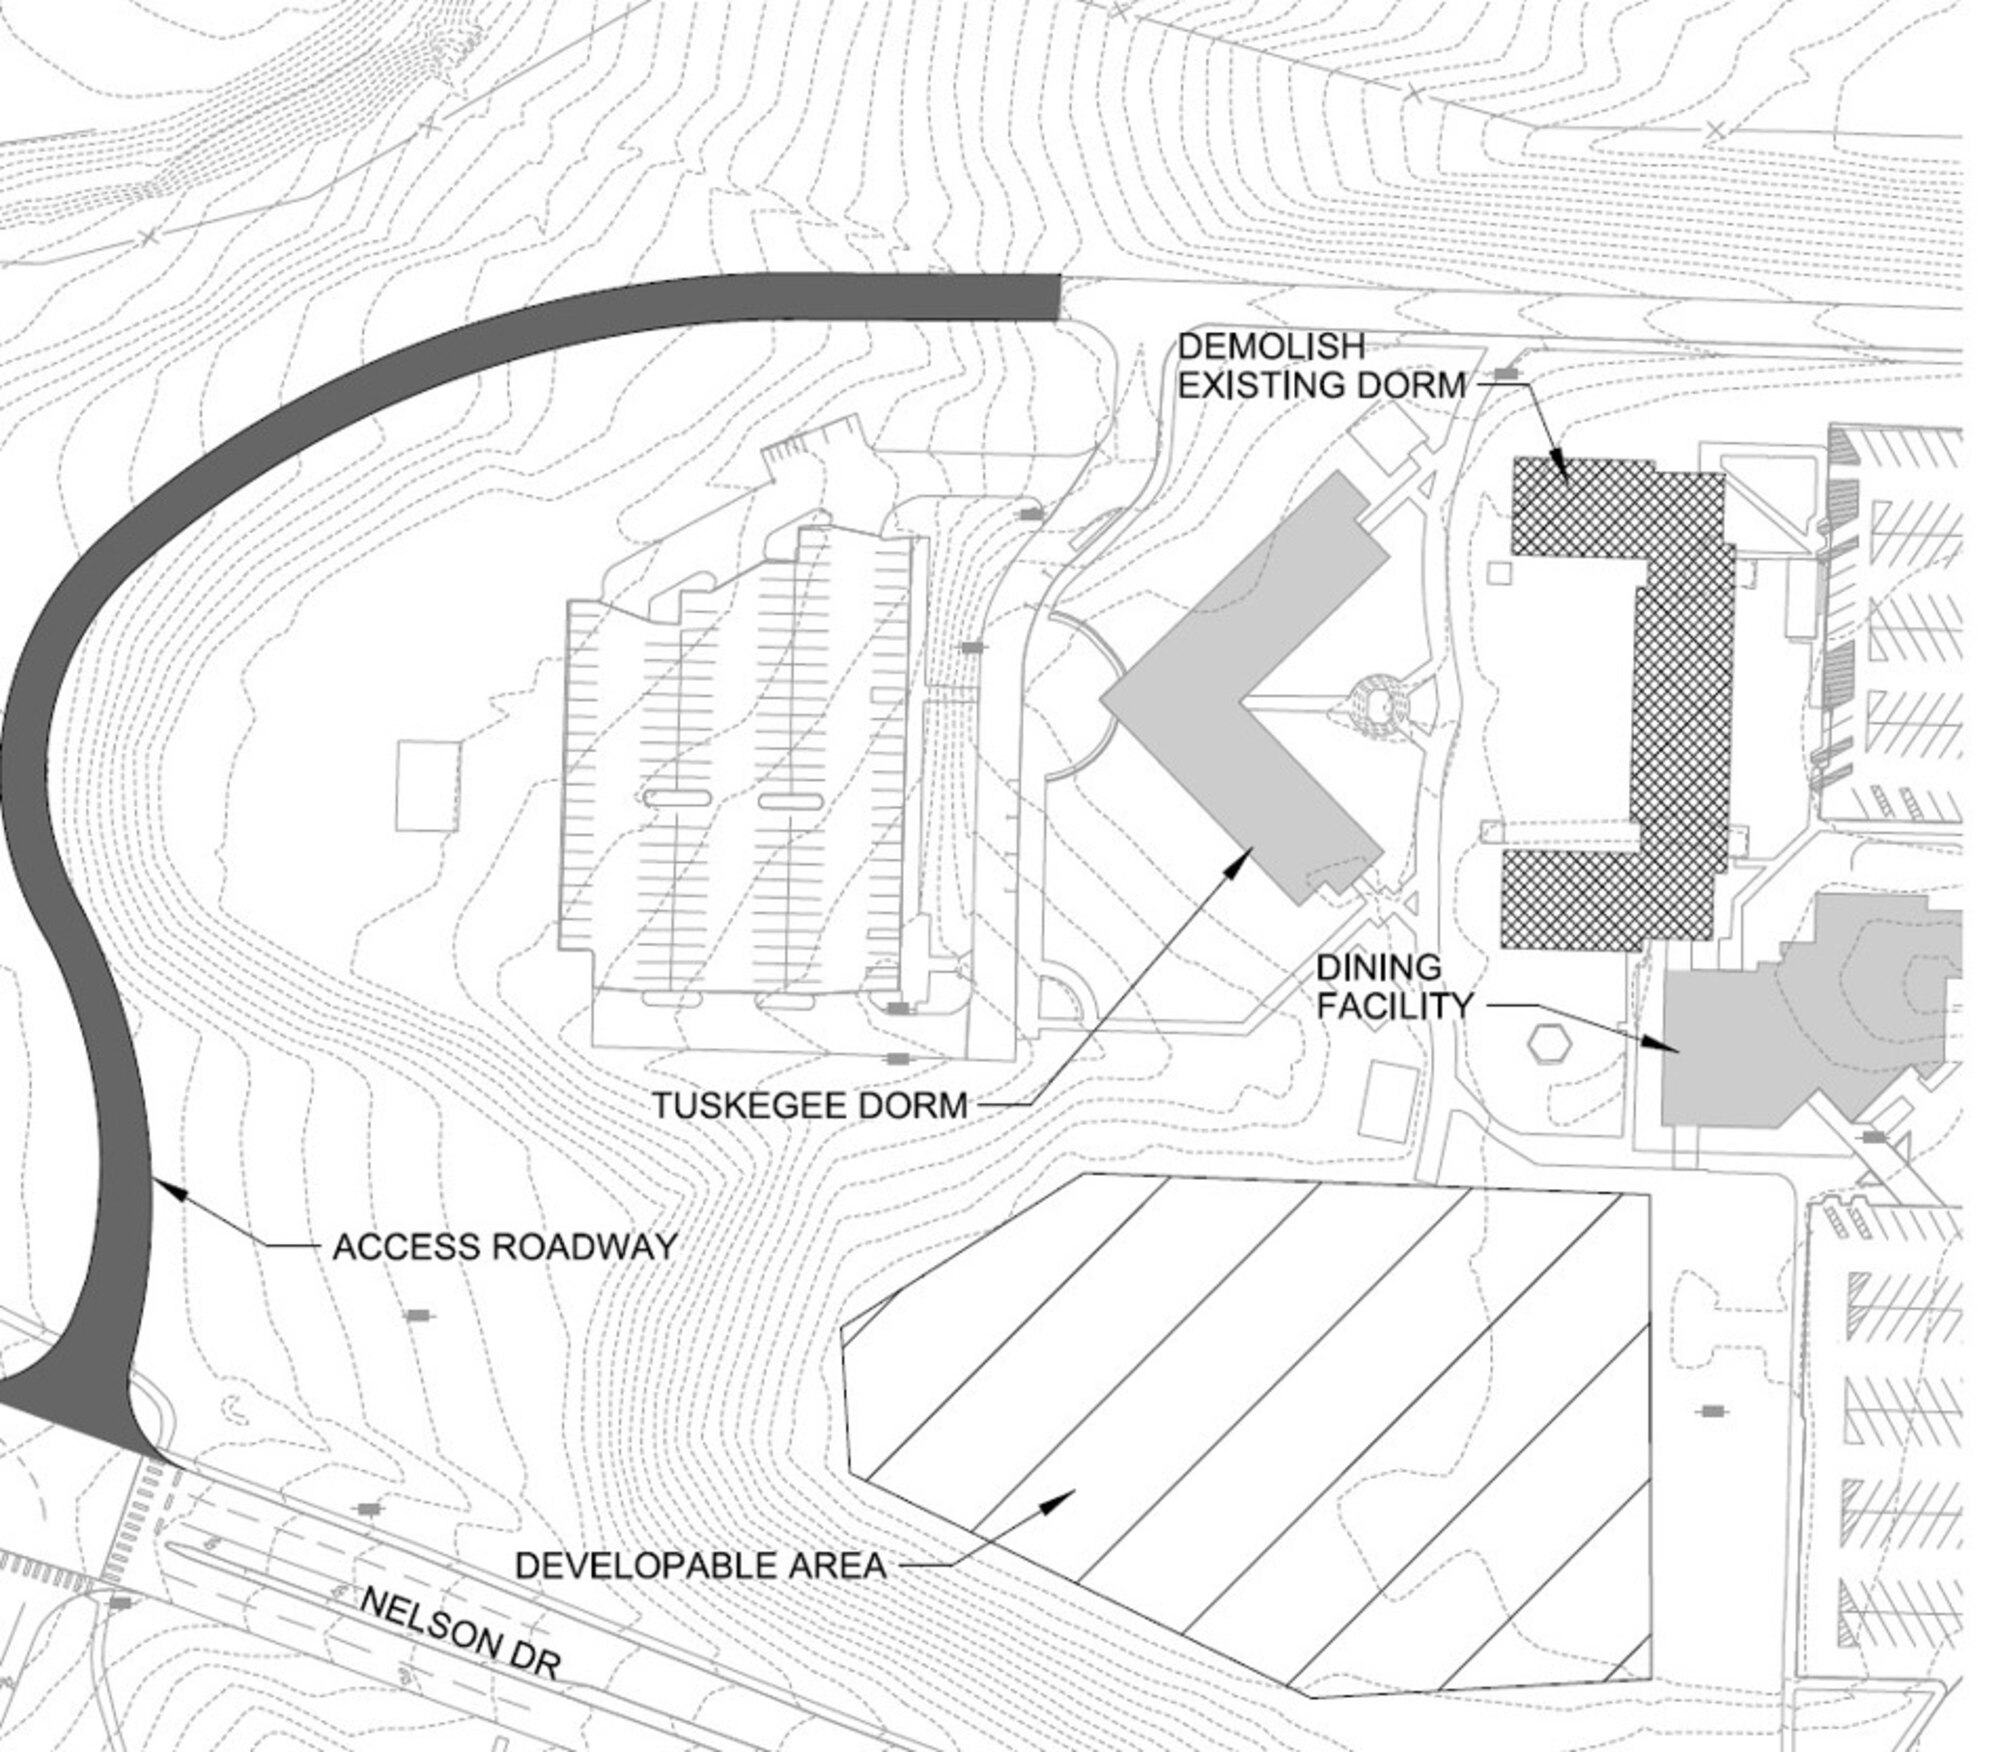 In addition to the new dormitory, the $18.8 contract also calls for a new access road to be built from Airman Drive to the Nelson Drive and SAC Boulevard intersection. Construction on the new dormitory is expected to be completed by late February 2019. (Courtesy graphic)